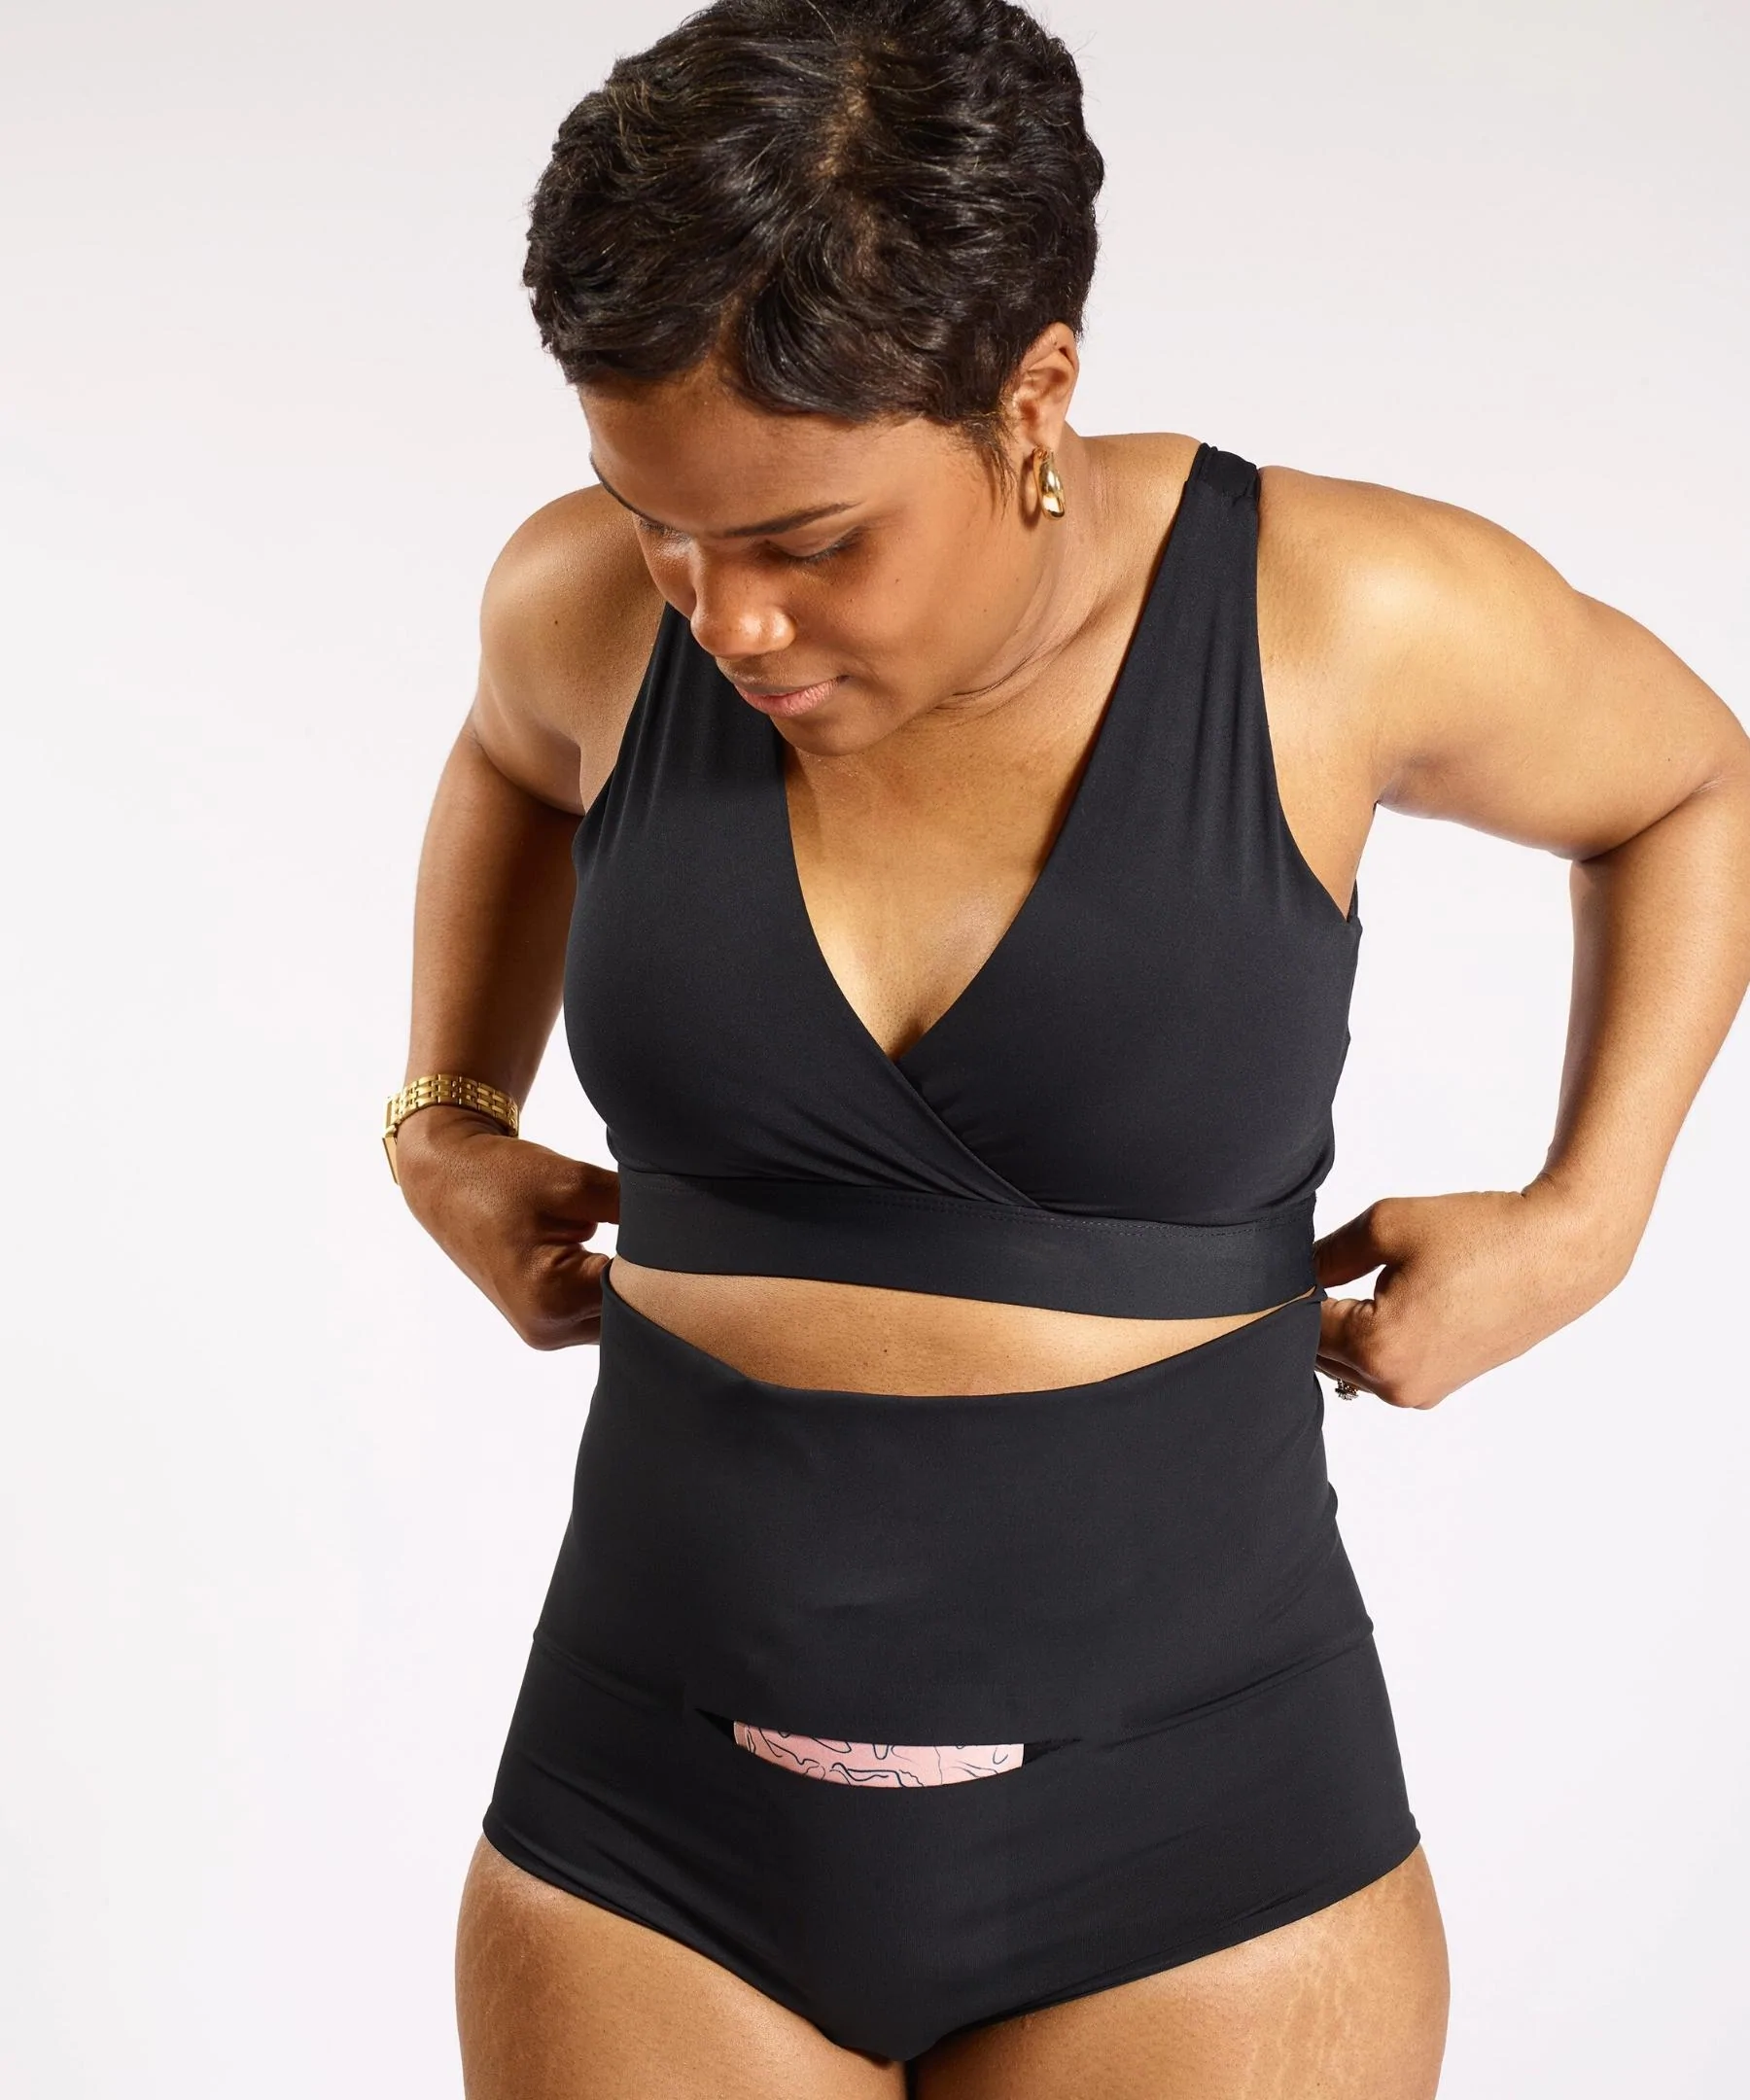 Best Postpartum and C Section Underwear For Easier Recovery